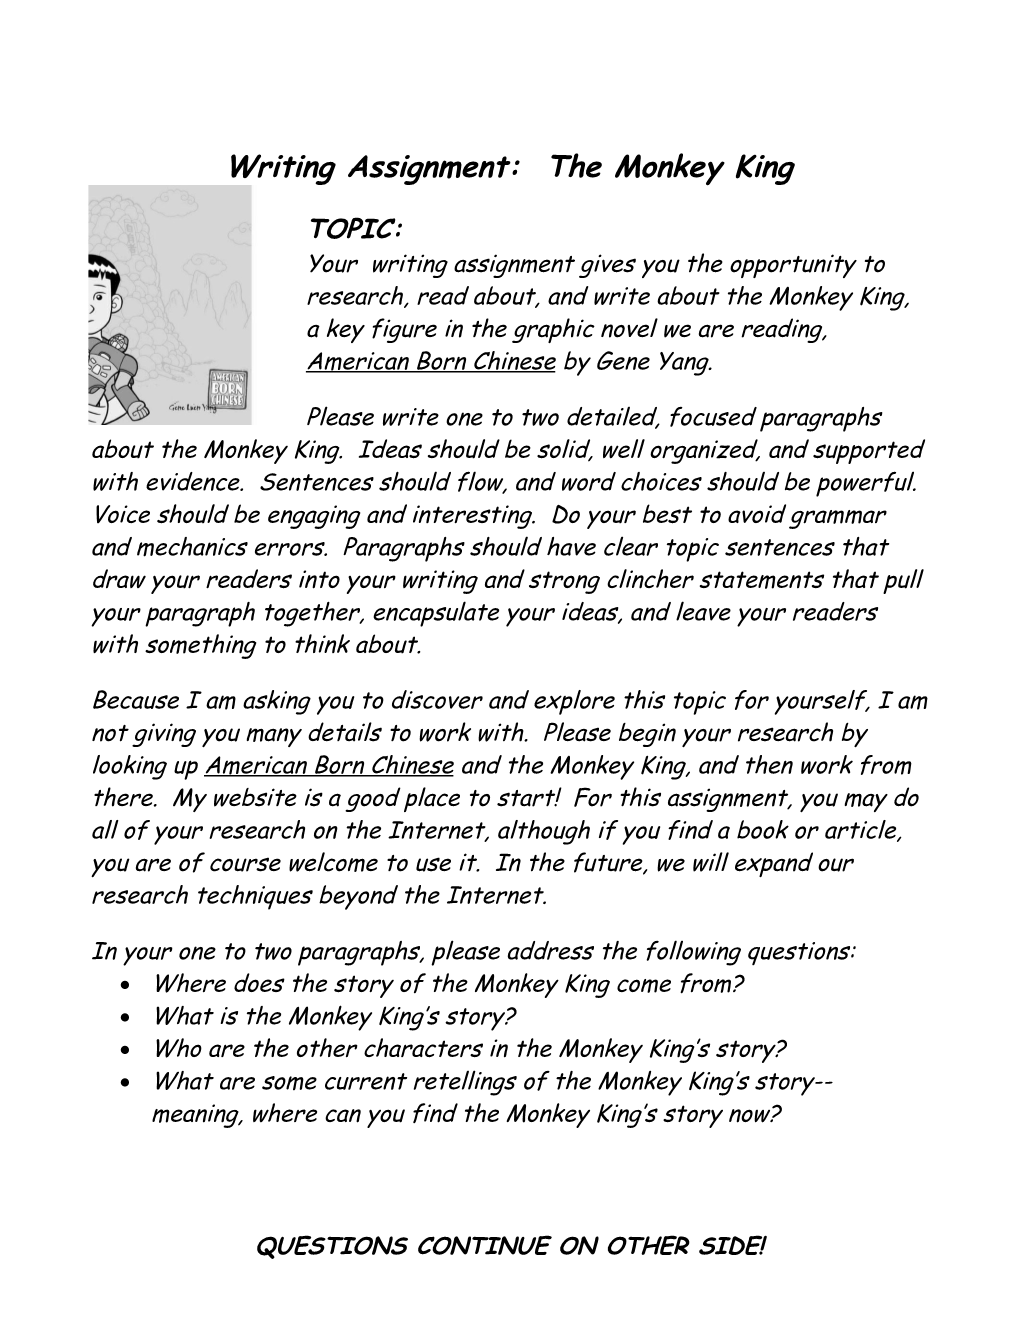 Writing Assignment #1: the Monkey King